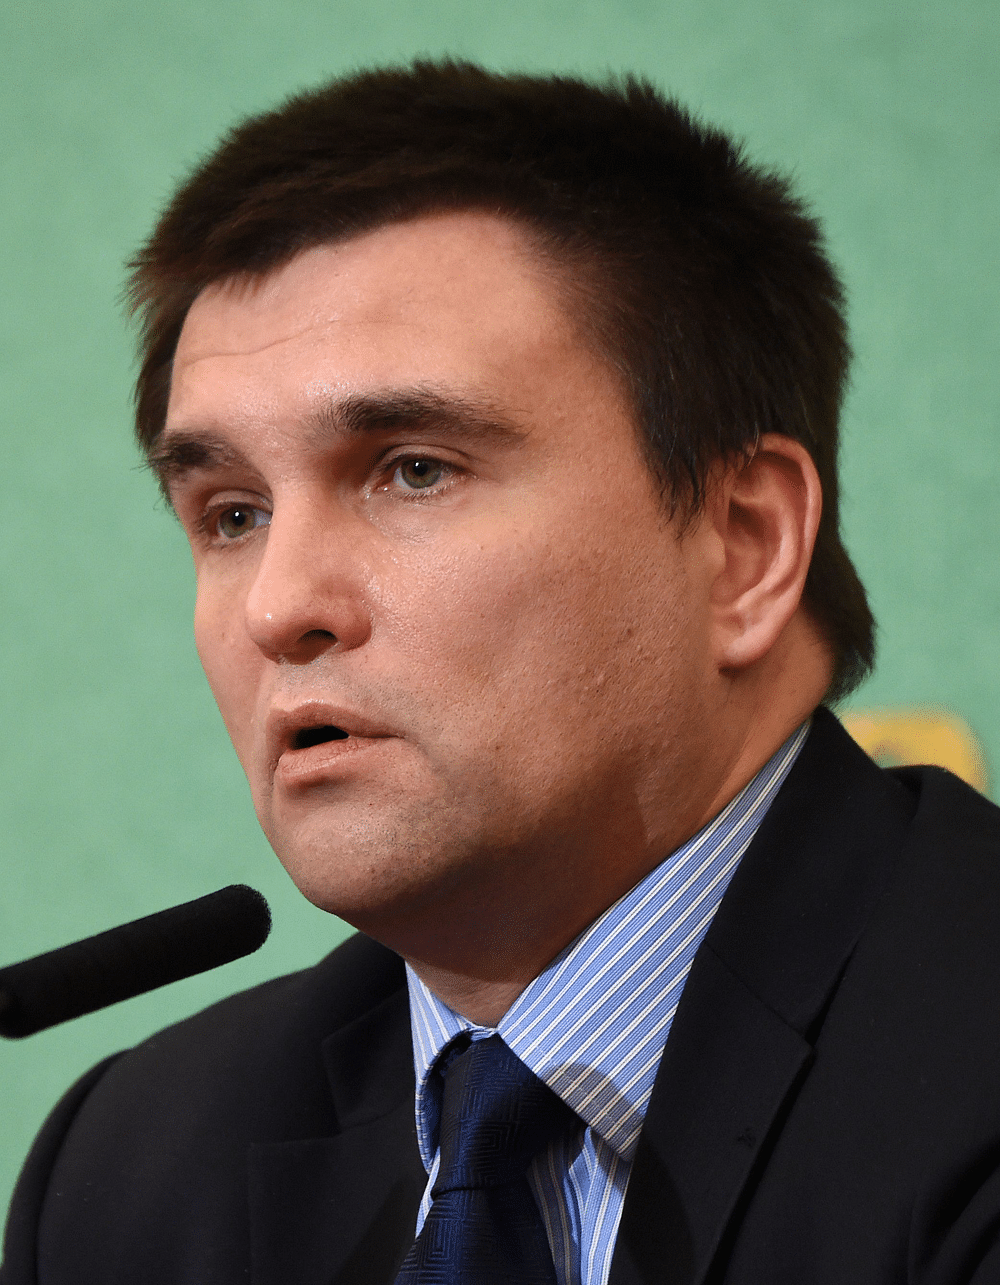 Ukraine's Foreign Minister PavloKlimkin answers questions during a press conference at the Japan National Press Club in Tokyo on 3 March 2015. Photo: AFP